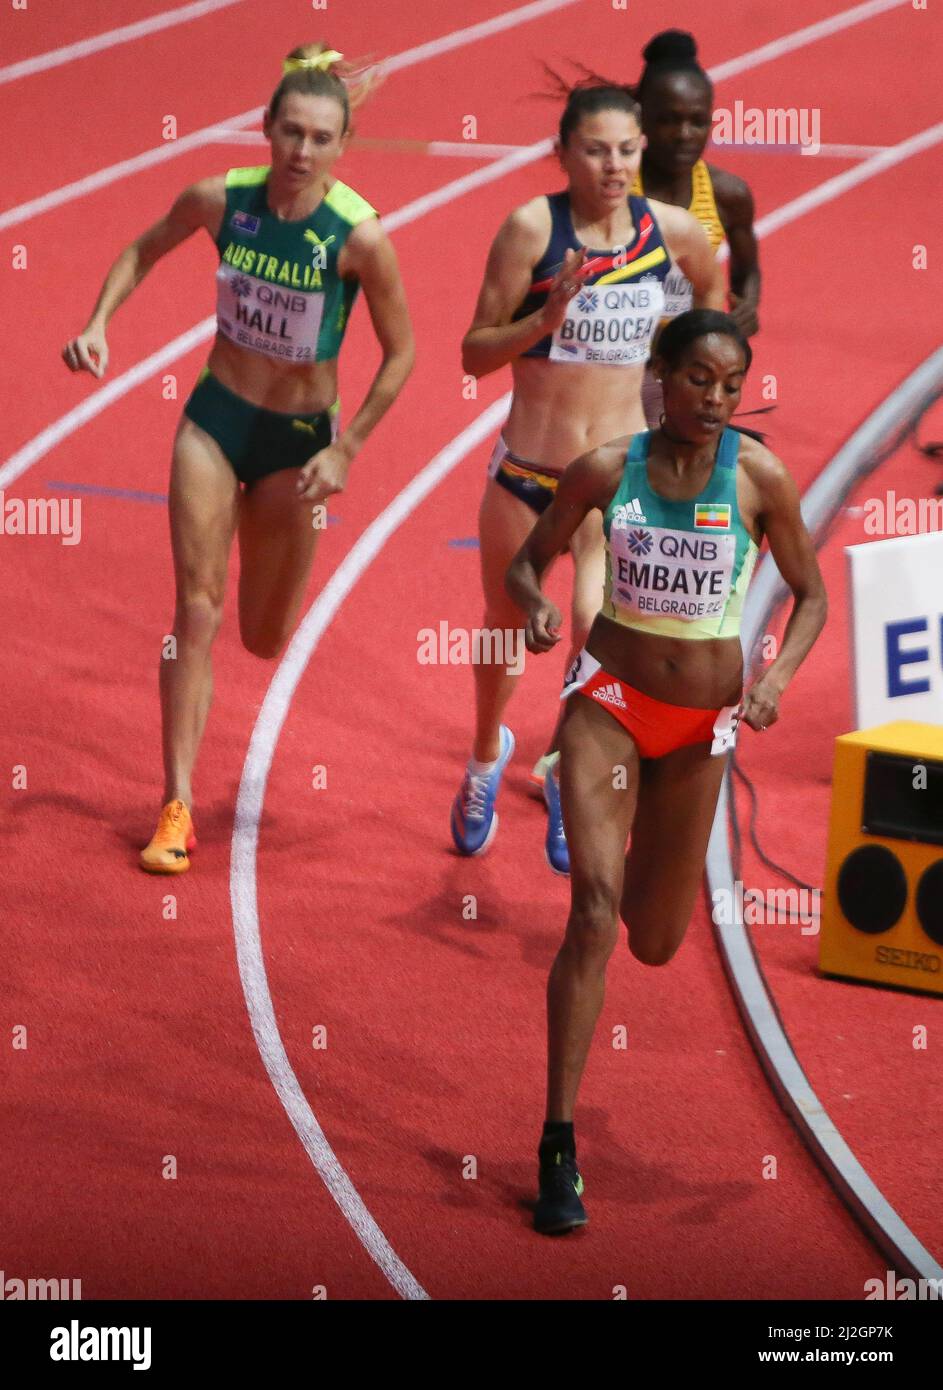 Axumawit EMBAYE of Ethiopia  ,  Claudia Mihaela BOBOCEA of Roumanie , Linden HALL of Australe and Winnie NANYONDO of Uganda Heat 1500 M Women during the World Athletics Indoor Championships 2022 on March 18, 2022 at Stark Arena in Belgrade, Serbia - Photo Laurent Lairys Stock Photo